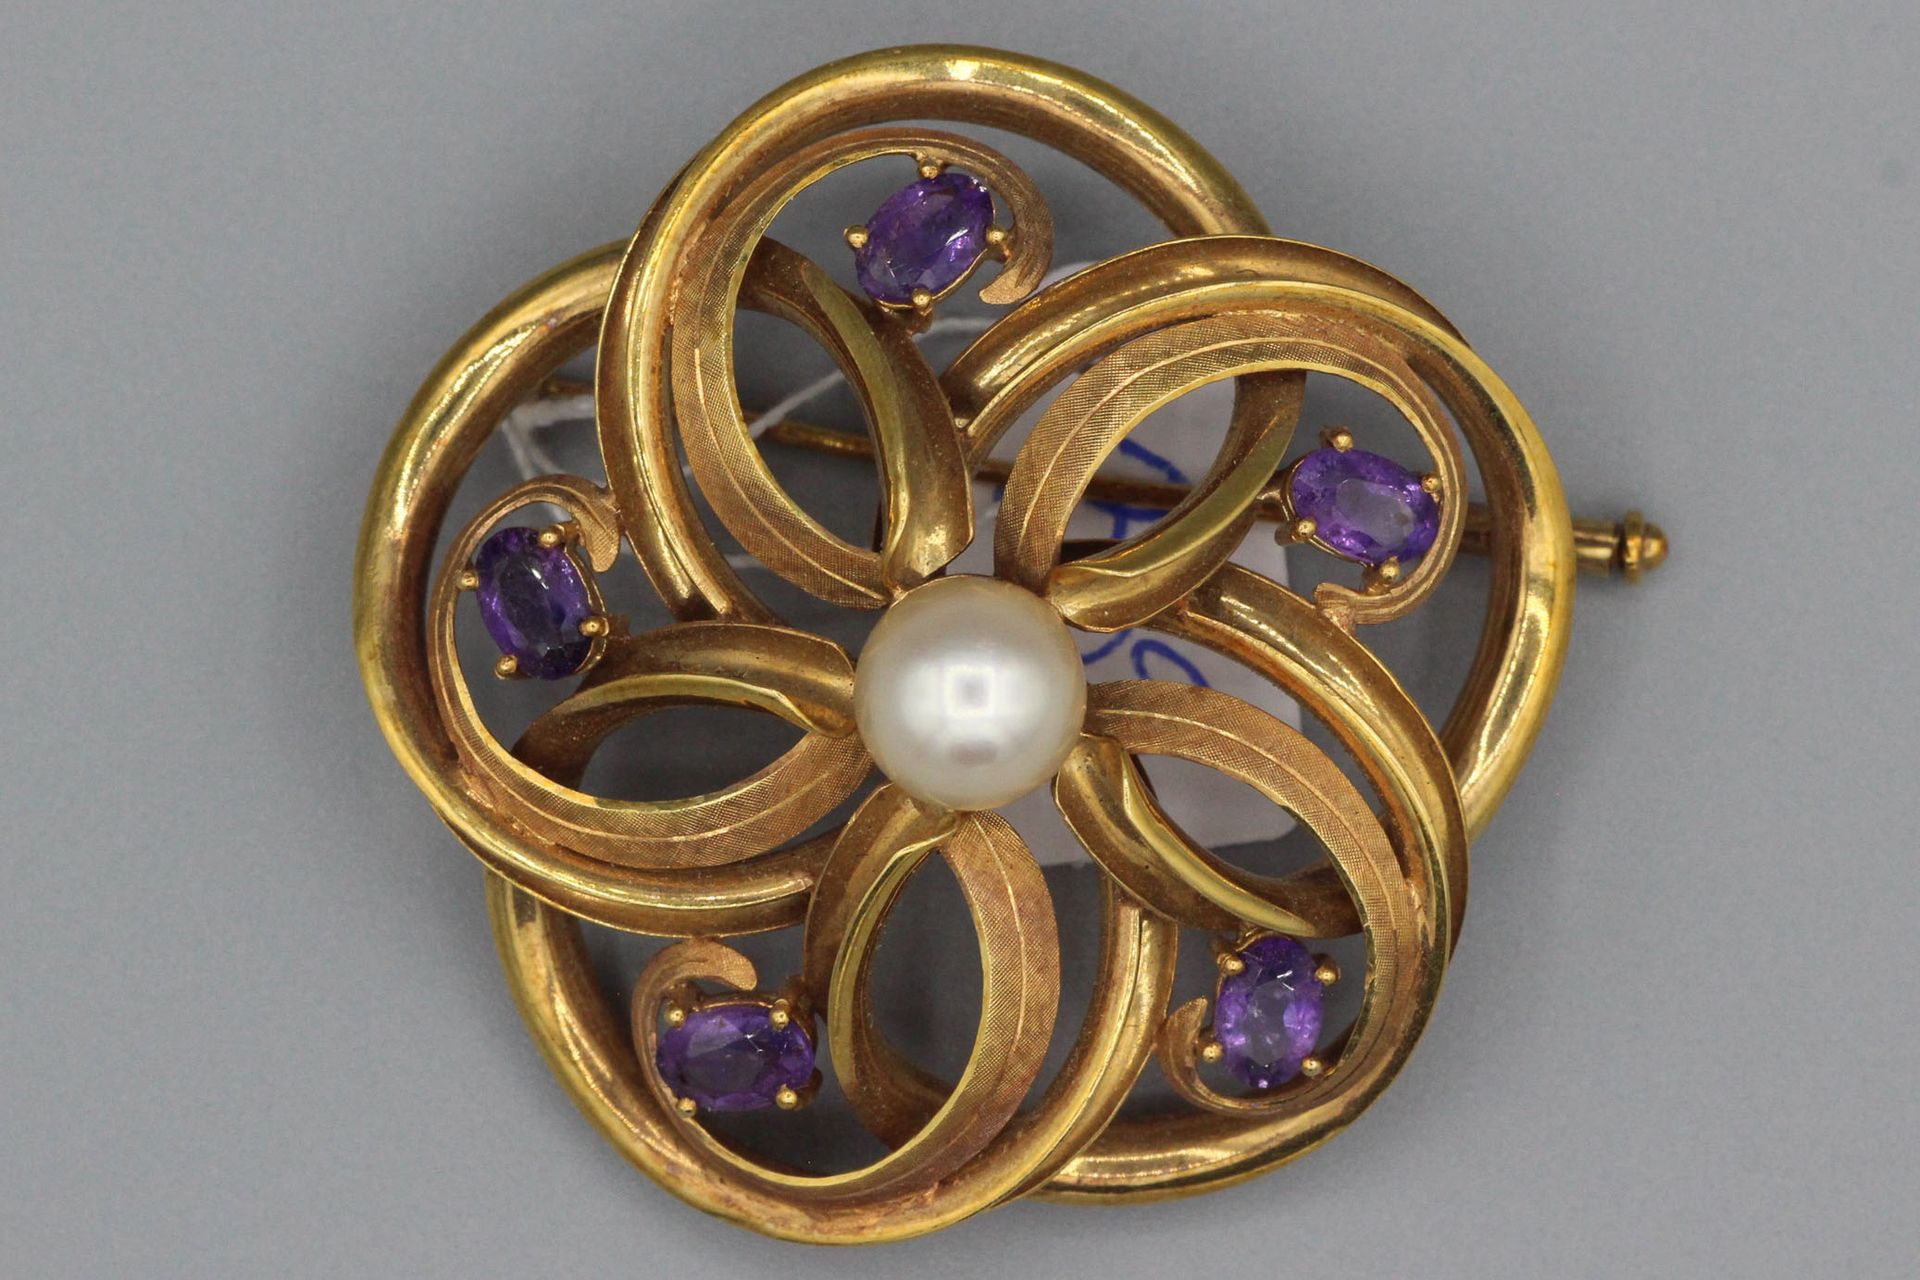 Null Gold brooch set with a pearl surrounded by amethysts - Gross weight: 18 g